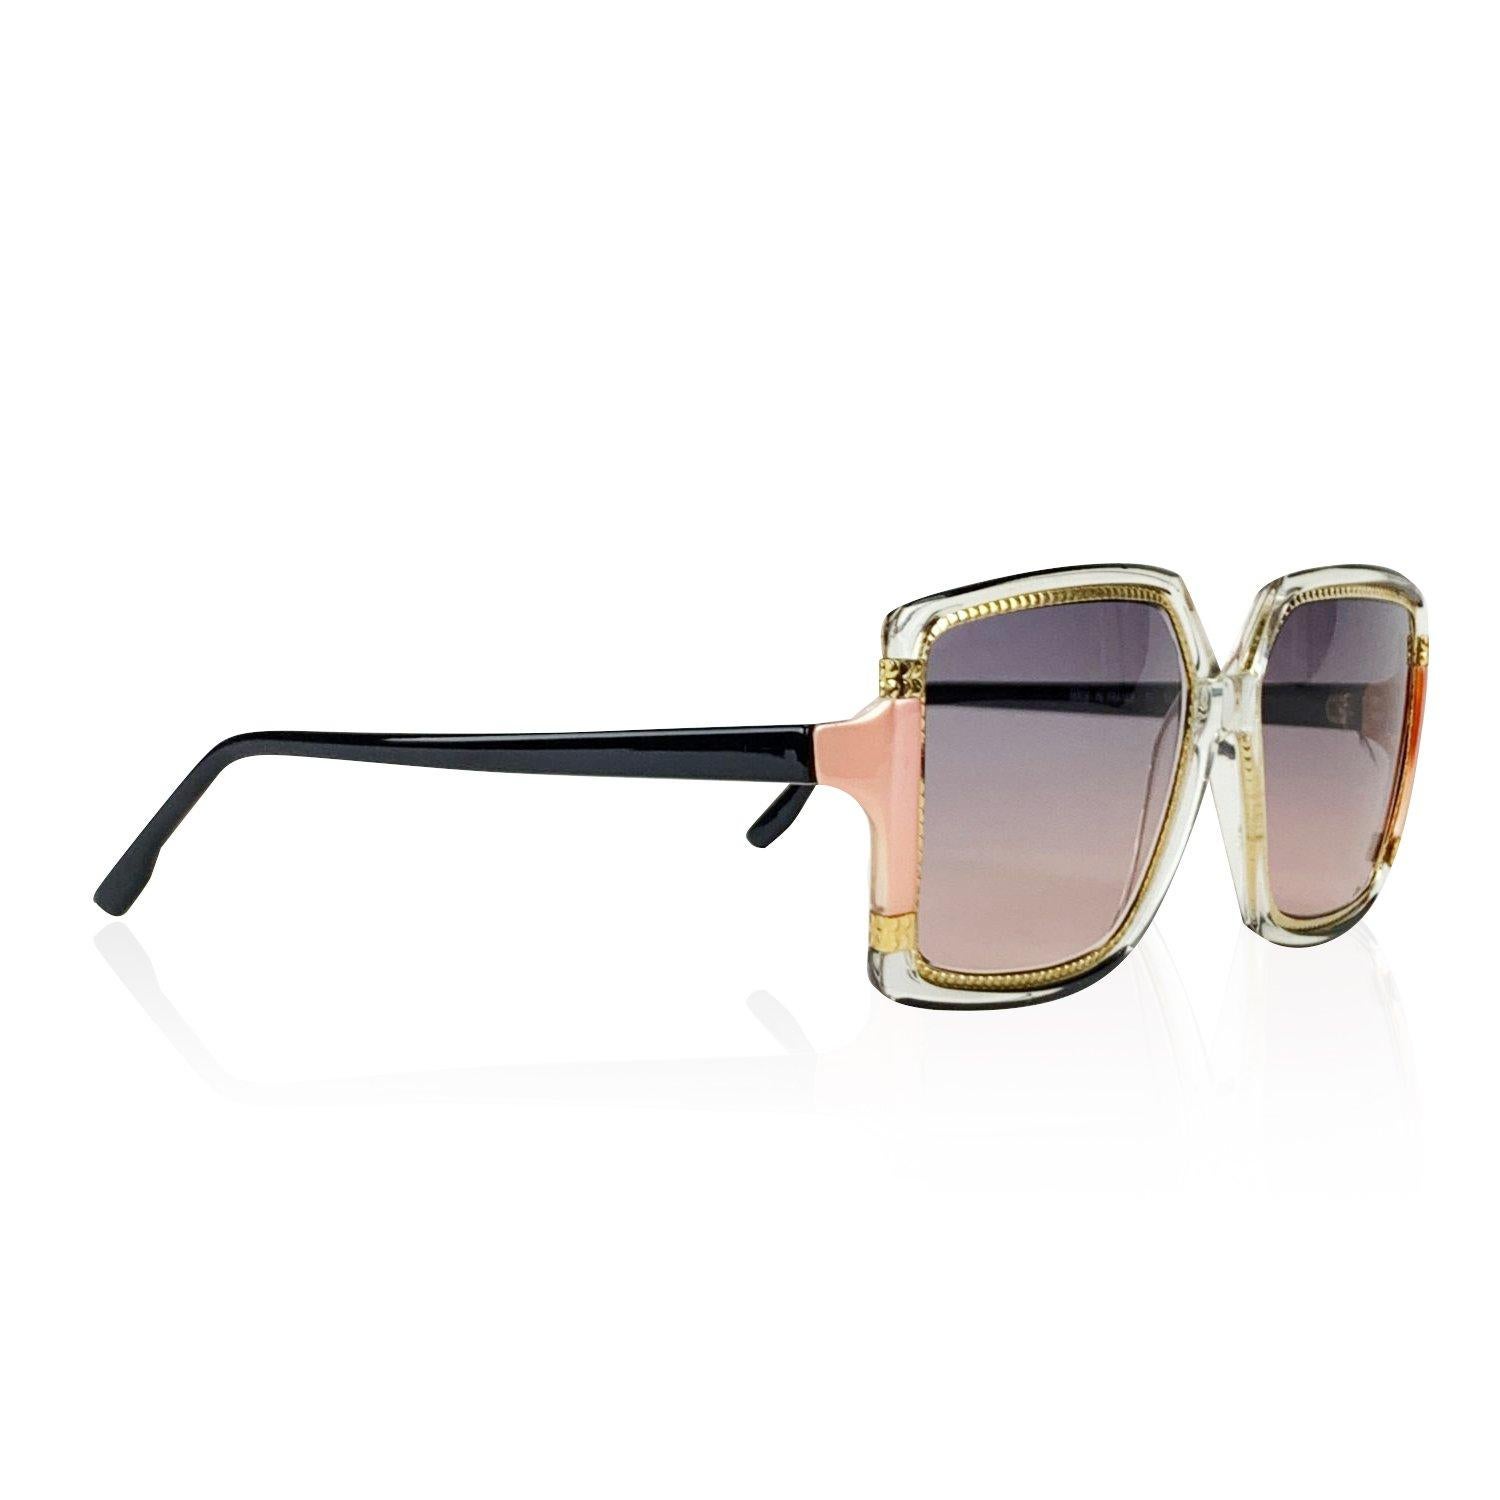 Rare vintage TED LAPIDUS oversized sunglasses mod. TL15 19. Clear oversize square frame with black and pink accents. Gold metal detailing. Purple gradient lenses (100% UV protection). Made in France. Details MATERIAL: Plastic COLOR: Clear MODEL: TL